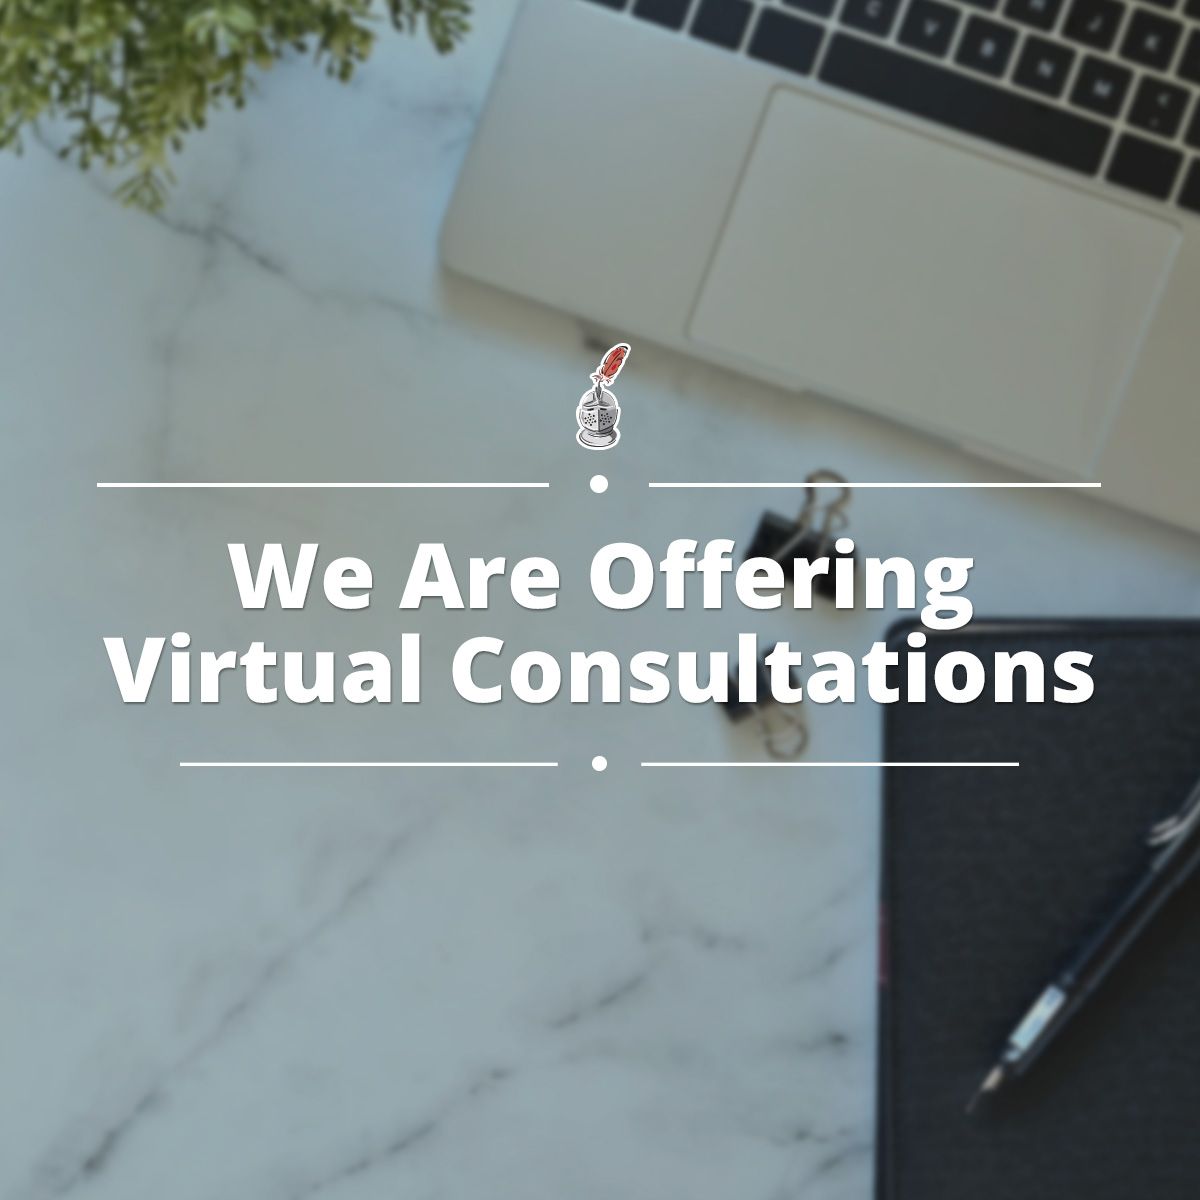 We Are Offering Virtual Consultations